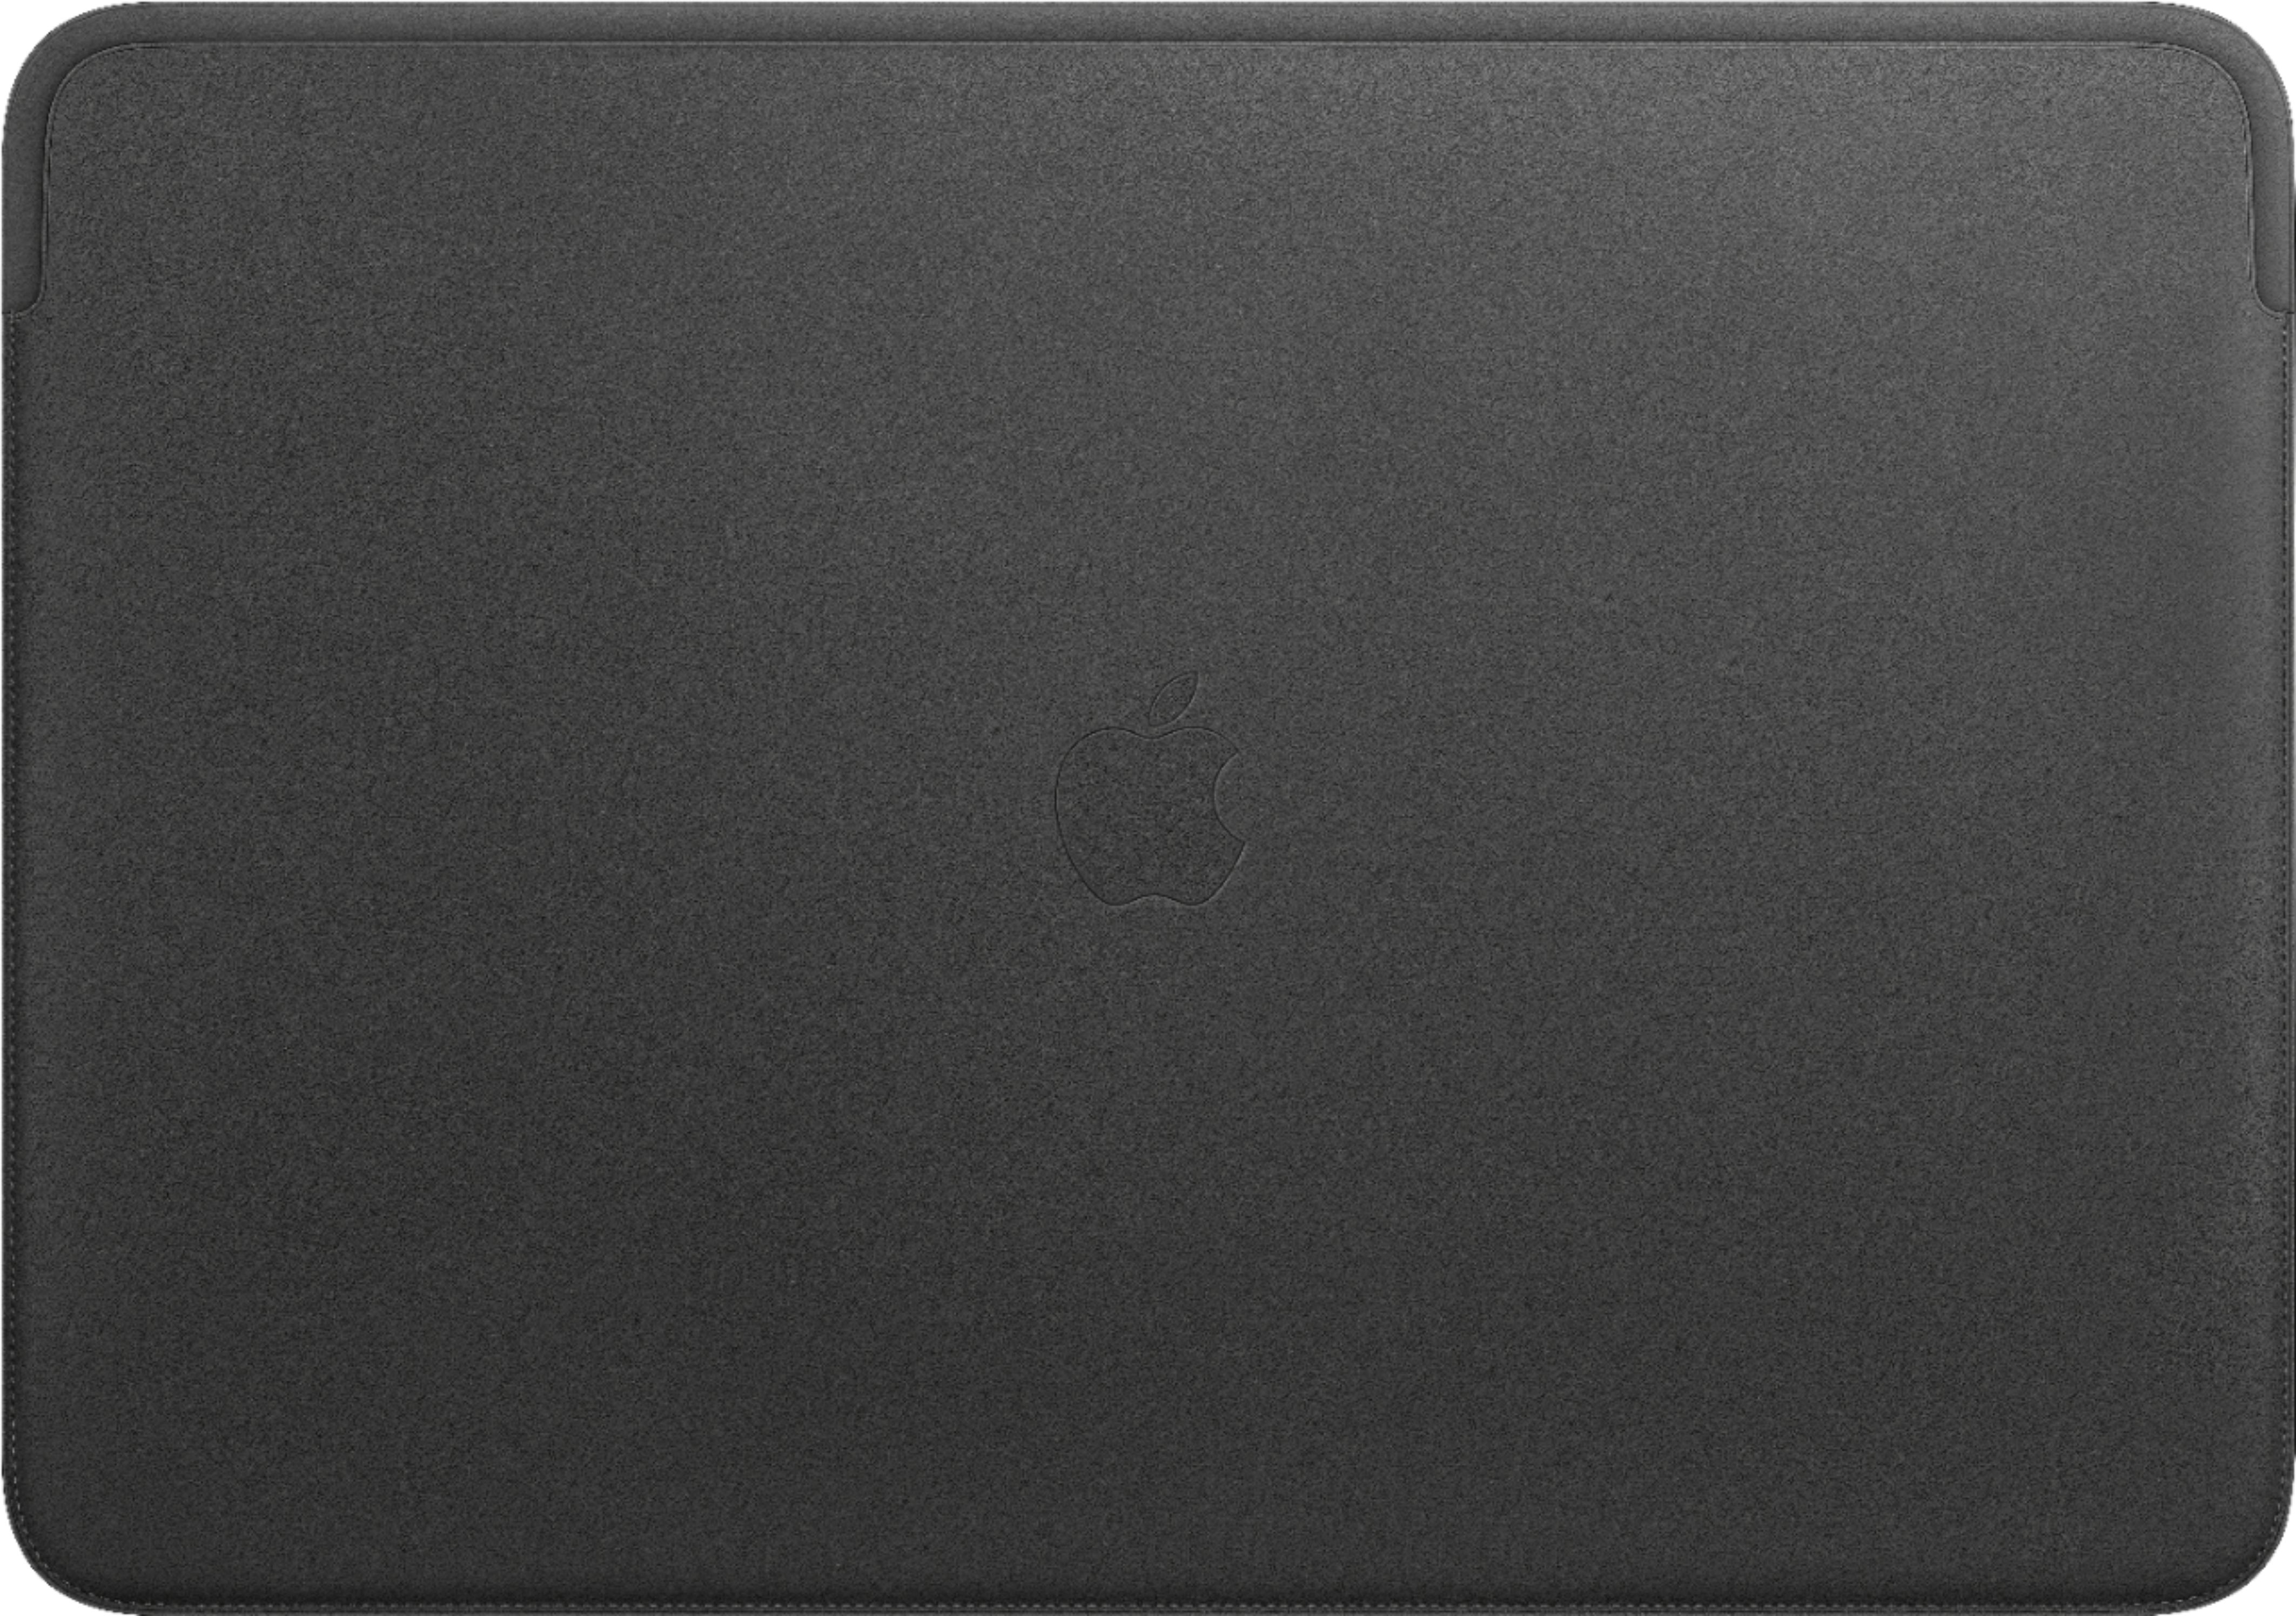 Apple Leather Sleeve For 16 Inch Macbook Pro Black Mwva2zm A Best Buy